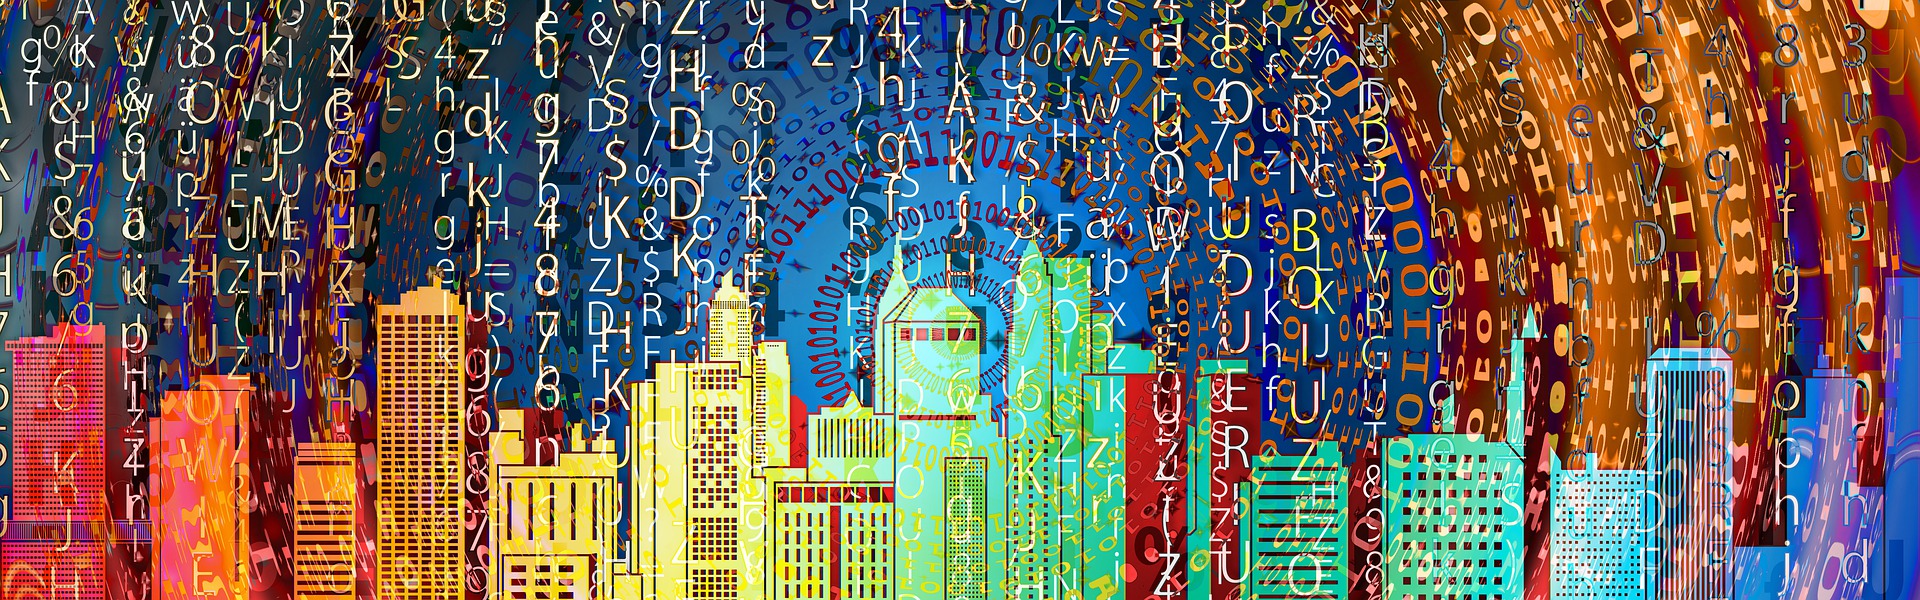 city skyline with letters